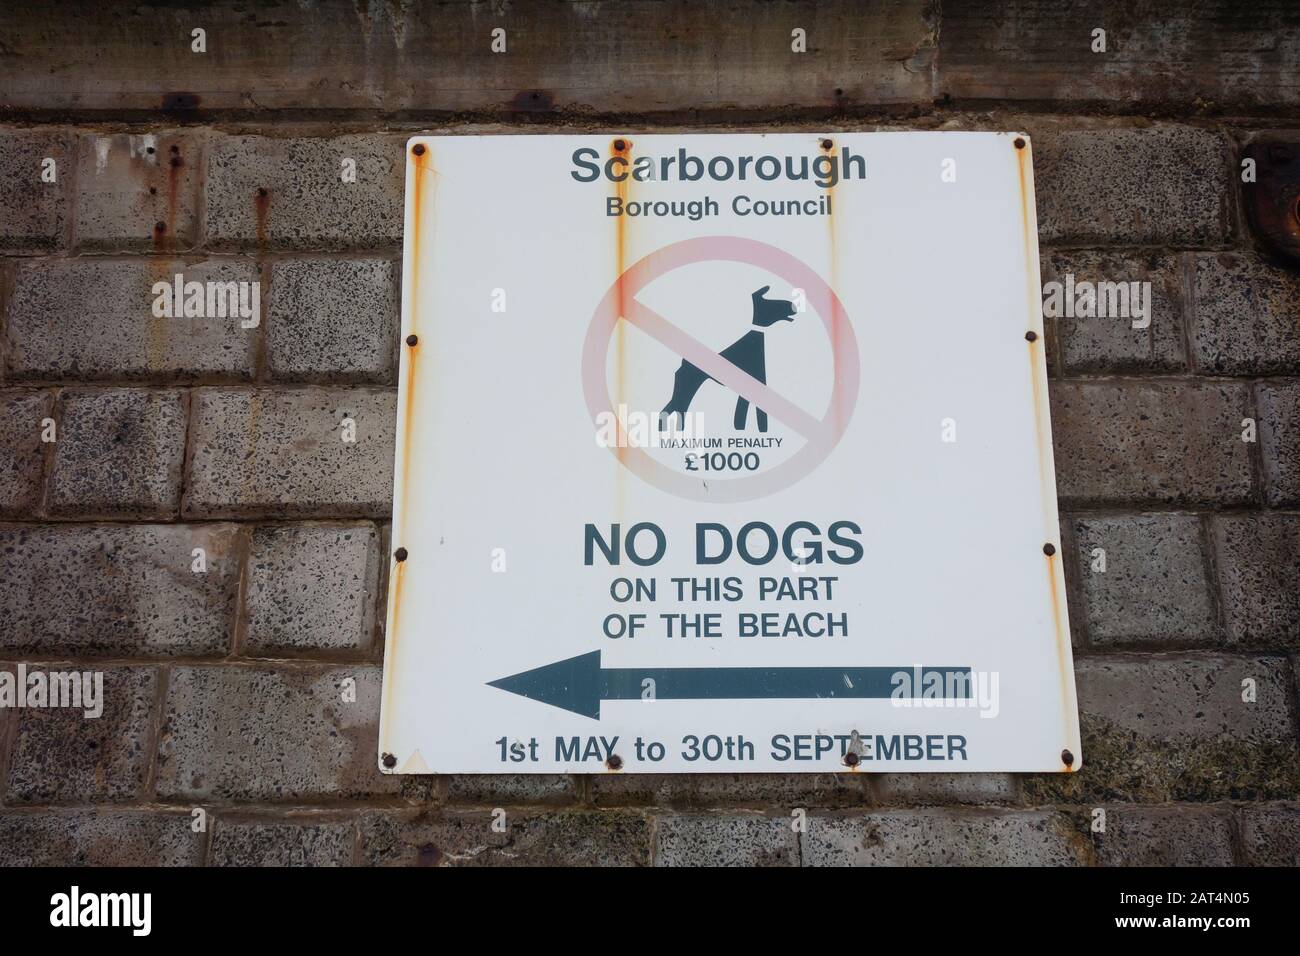 Filey sea defenses wall, no dogs sign, North Yorkshire. Stock Photo